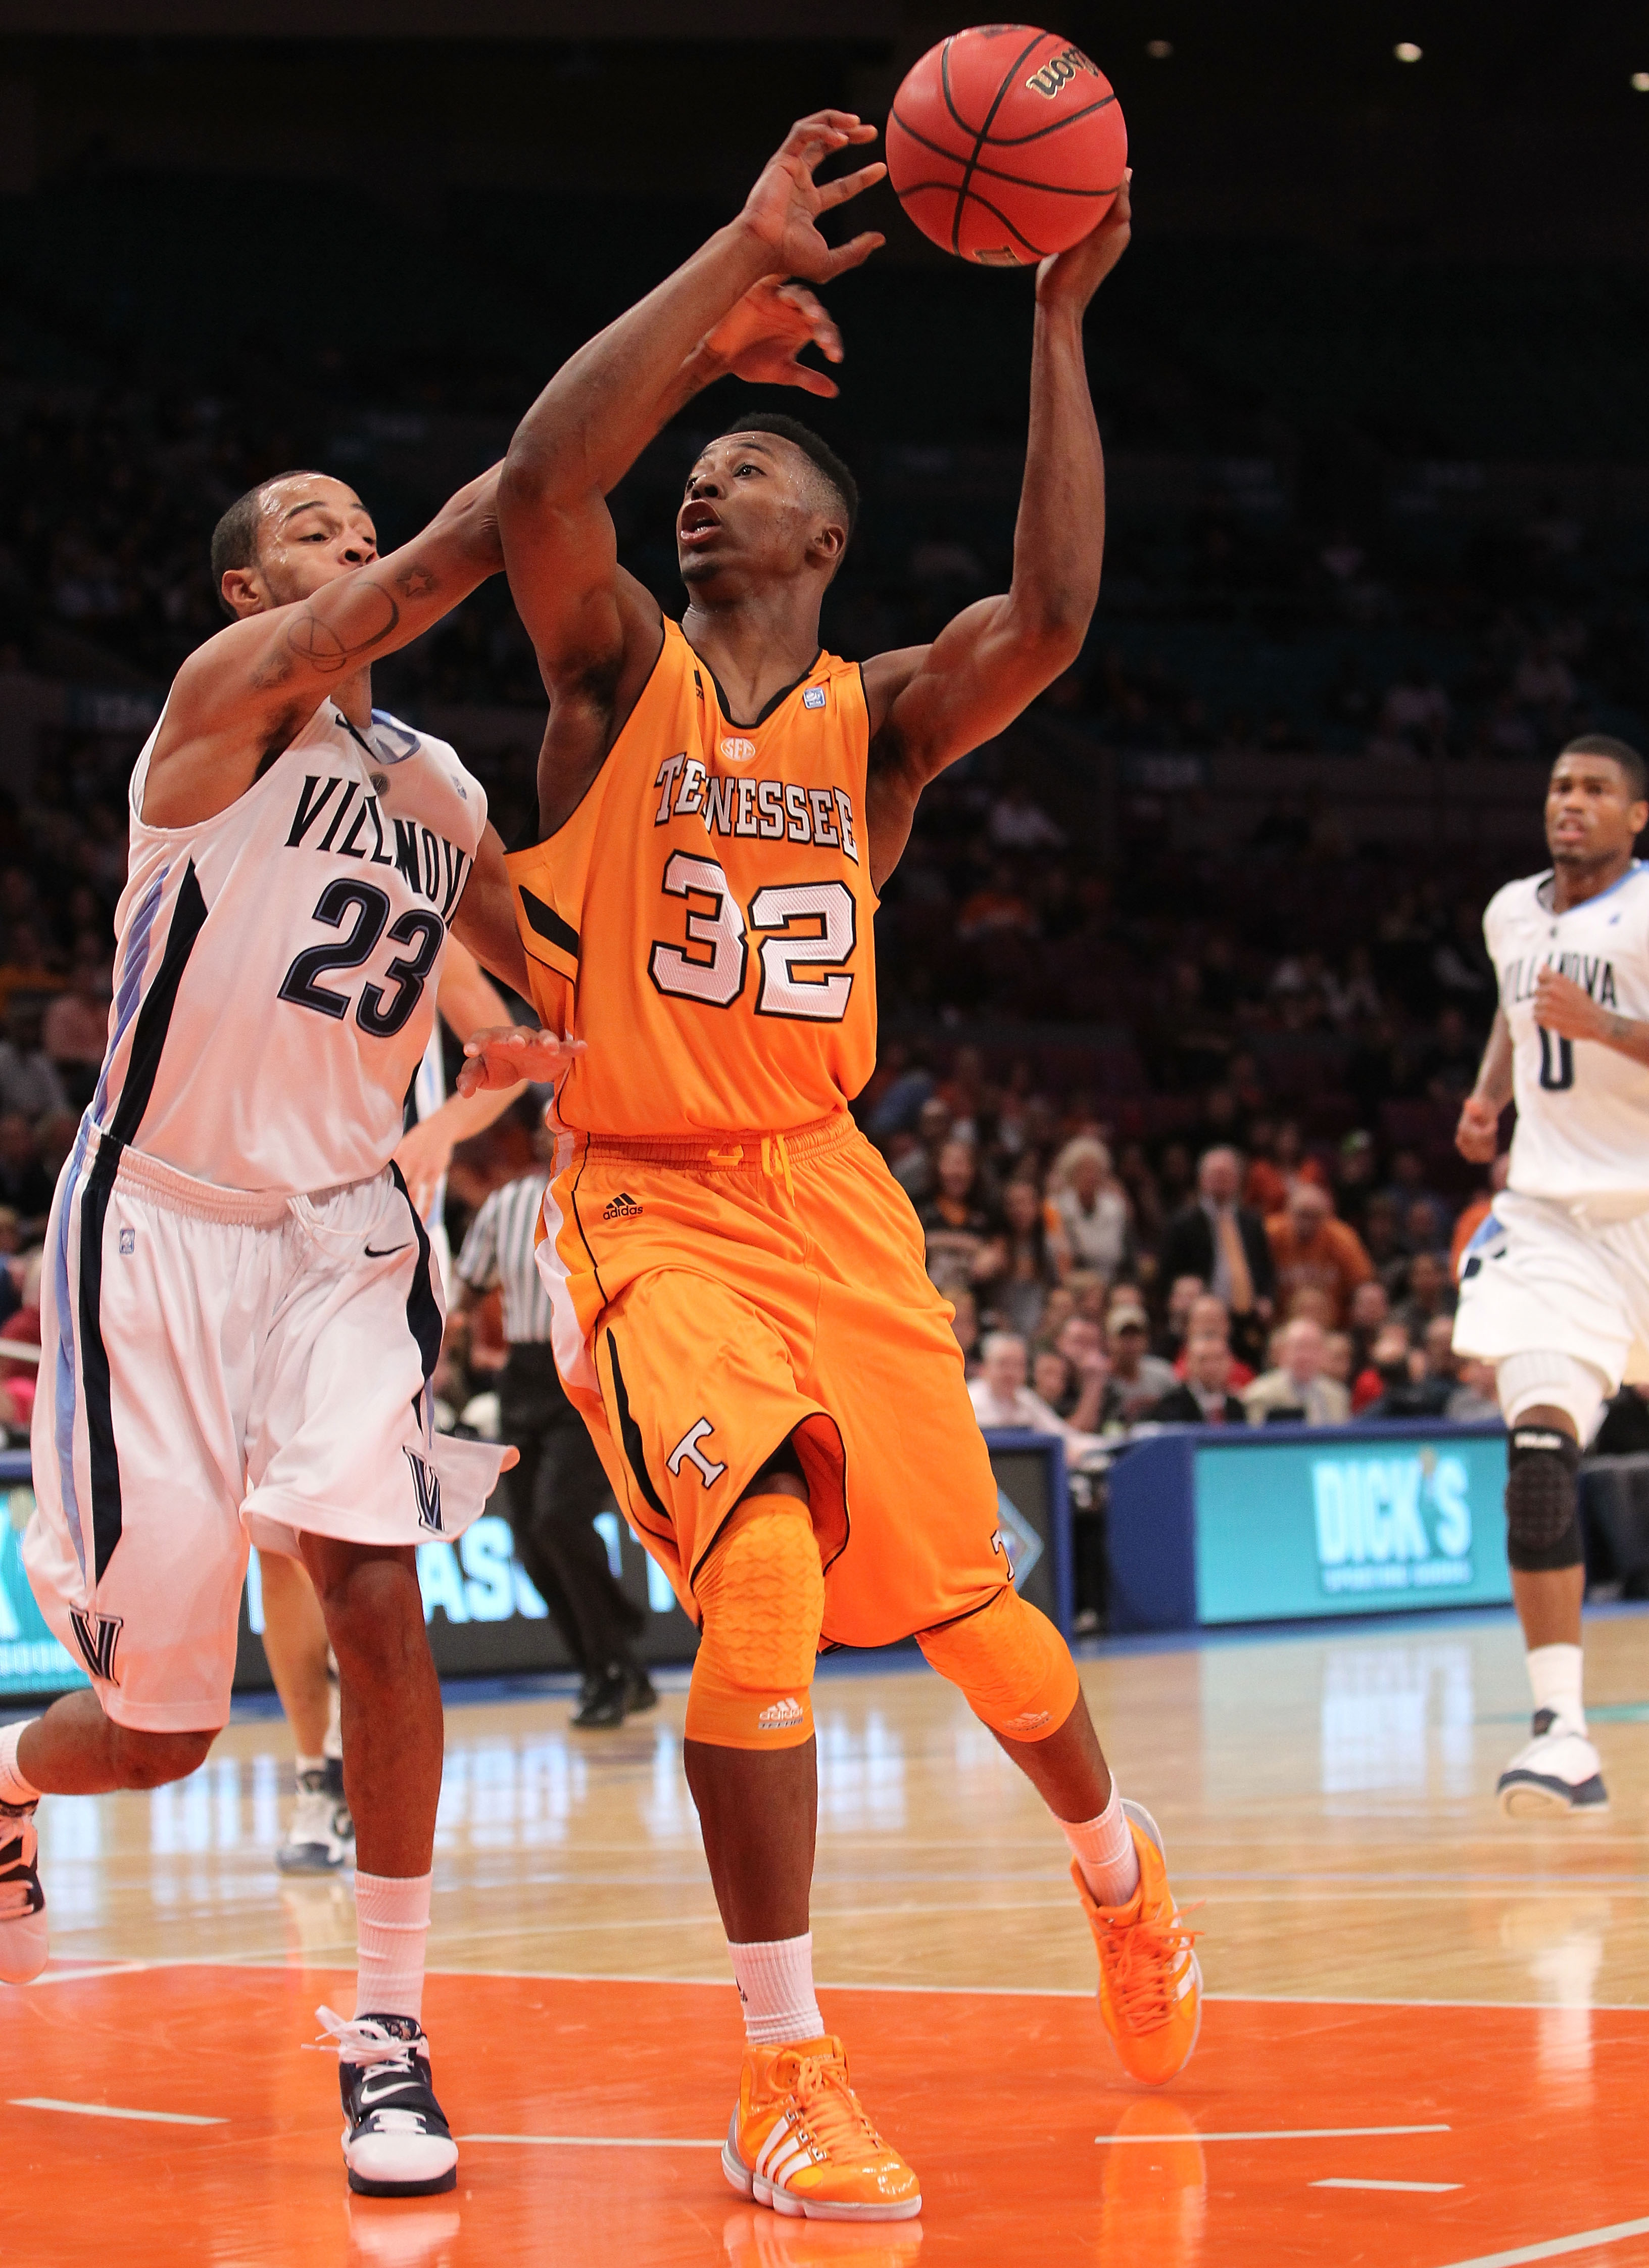 NEW YORK - NOVEMBER 26:  Scotty Hopson #32 of the Tennessee Volunteers is fouled by Dominic Cheek #23 of the Villanova Wildcats  during the Championship game at Madison Square Garden on November 26, 2010 in New York City.  (Photo by Nick Laham/Getty Image